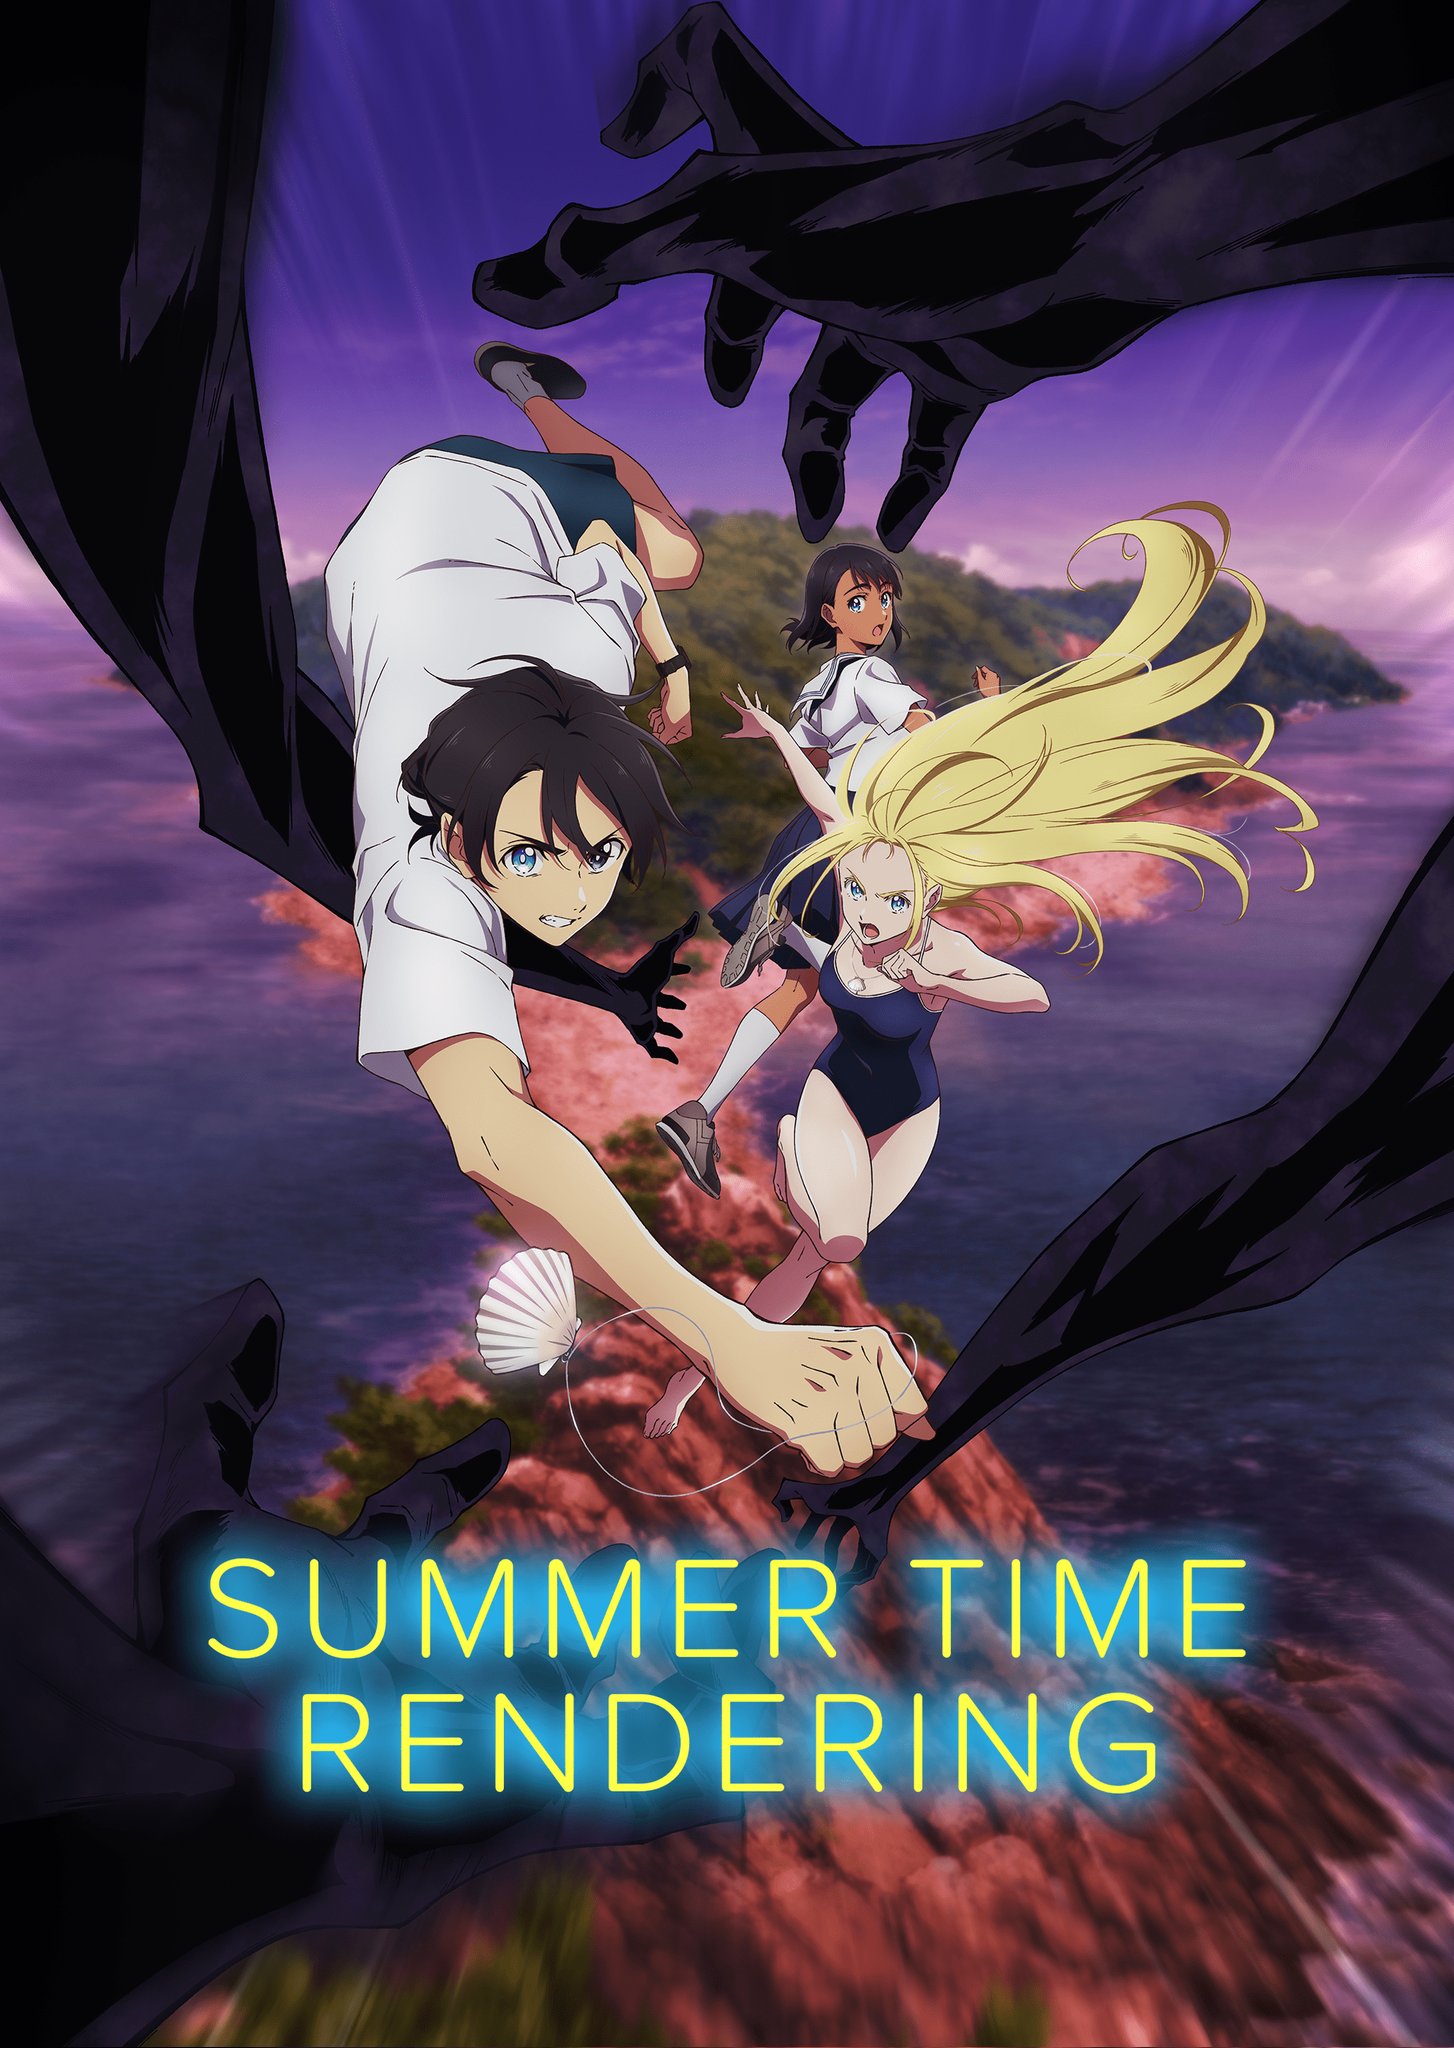 Summertime Render or Summer Time Rendering All Anime Characters in